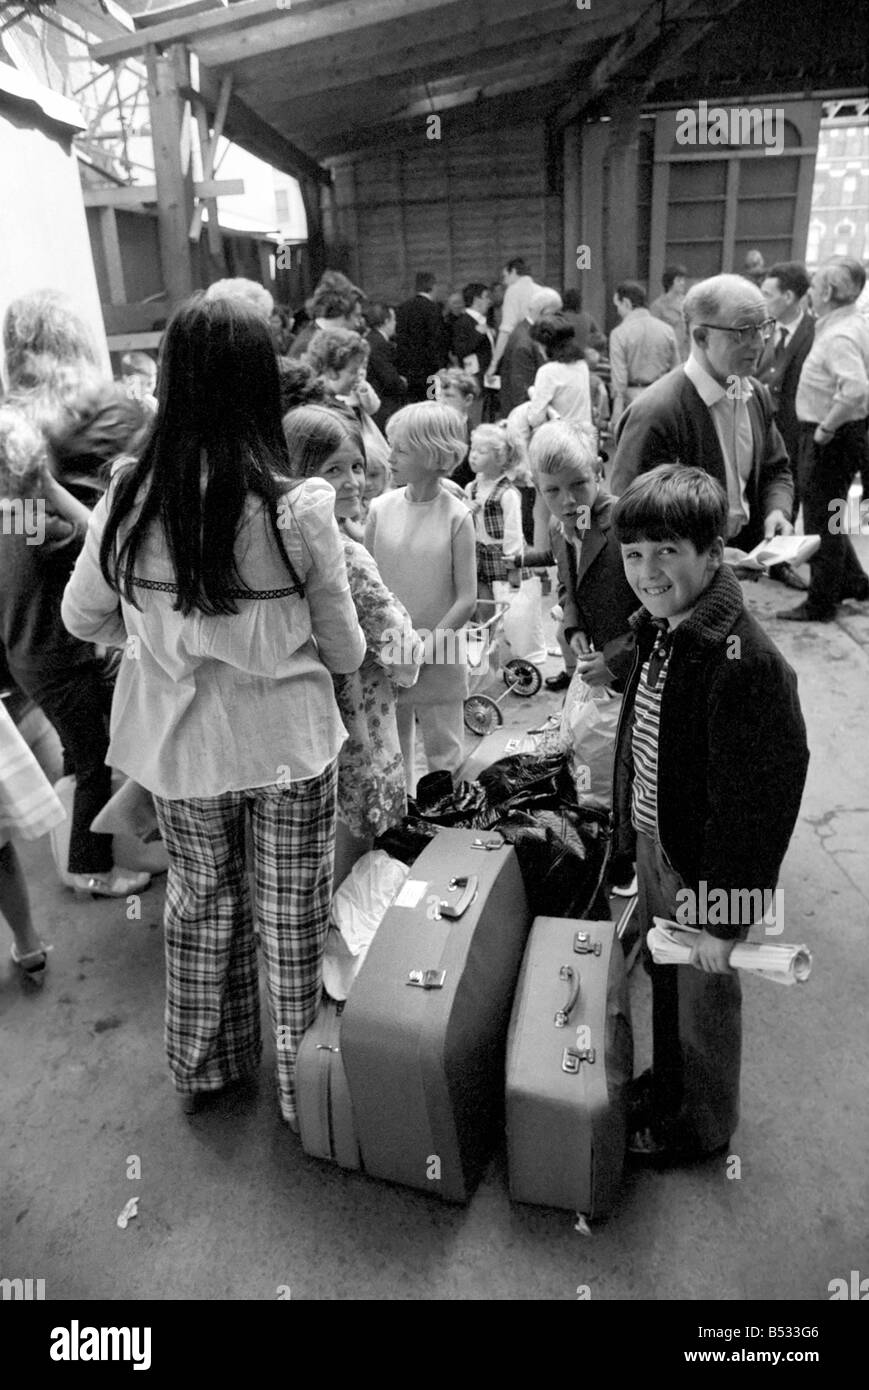 George Phillips, staff. Northern Ireland July 1972. Children waiting for the train in Belfast as families flee from the bombs and bullets. July 1972. July 1972 72-7262-001 Stock Photo